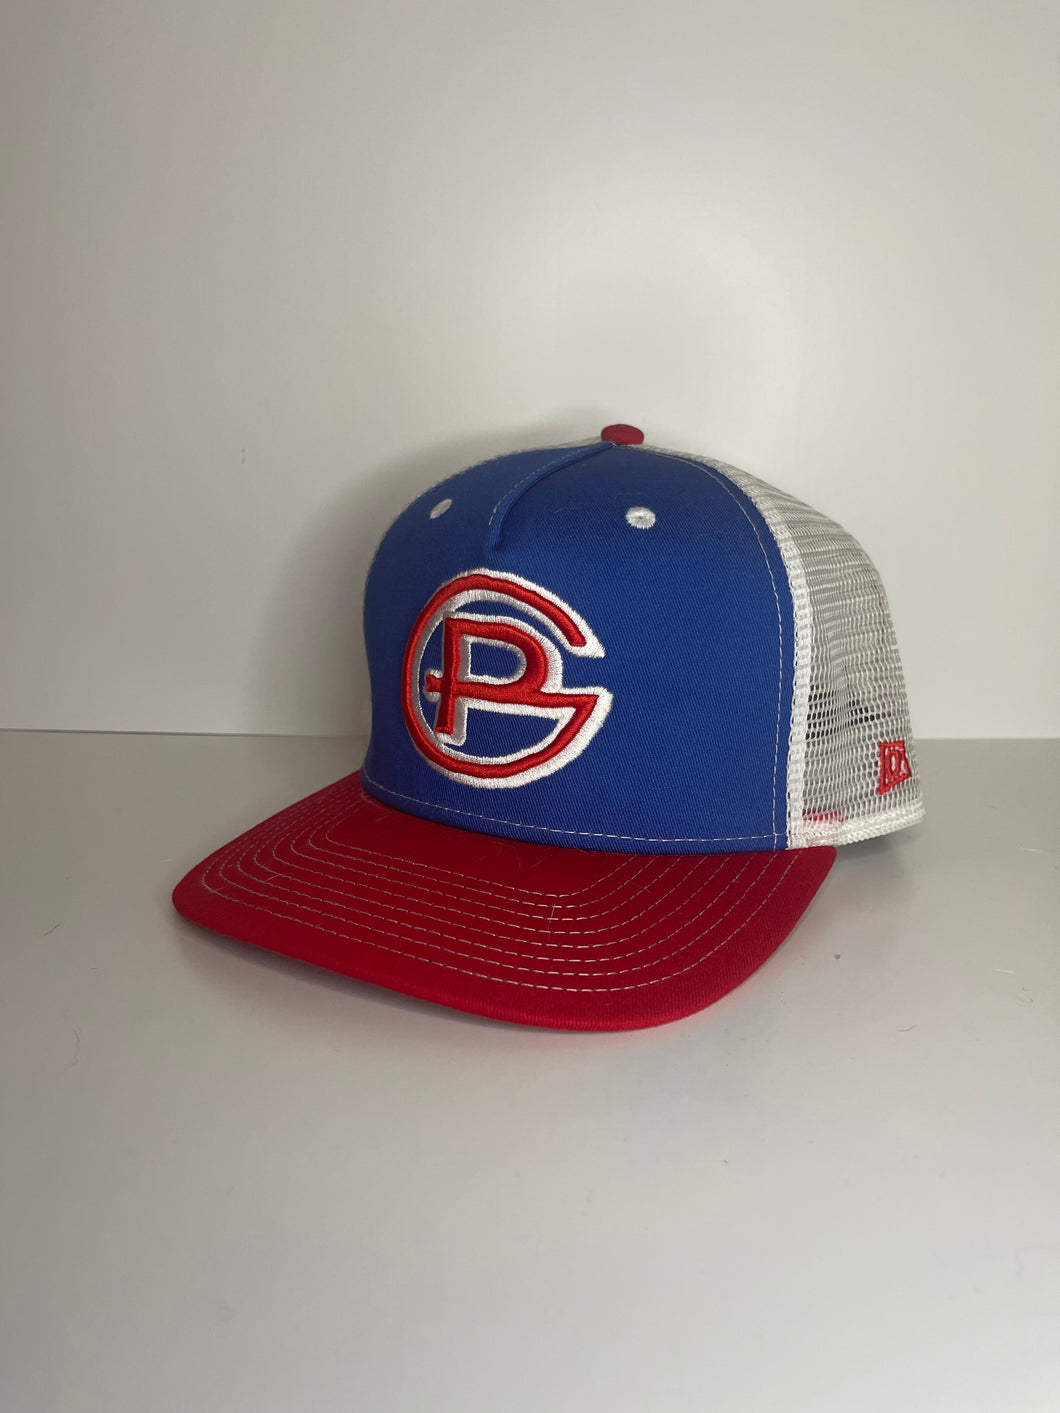 Red White and Blue PG Cap